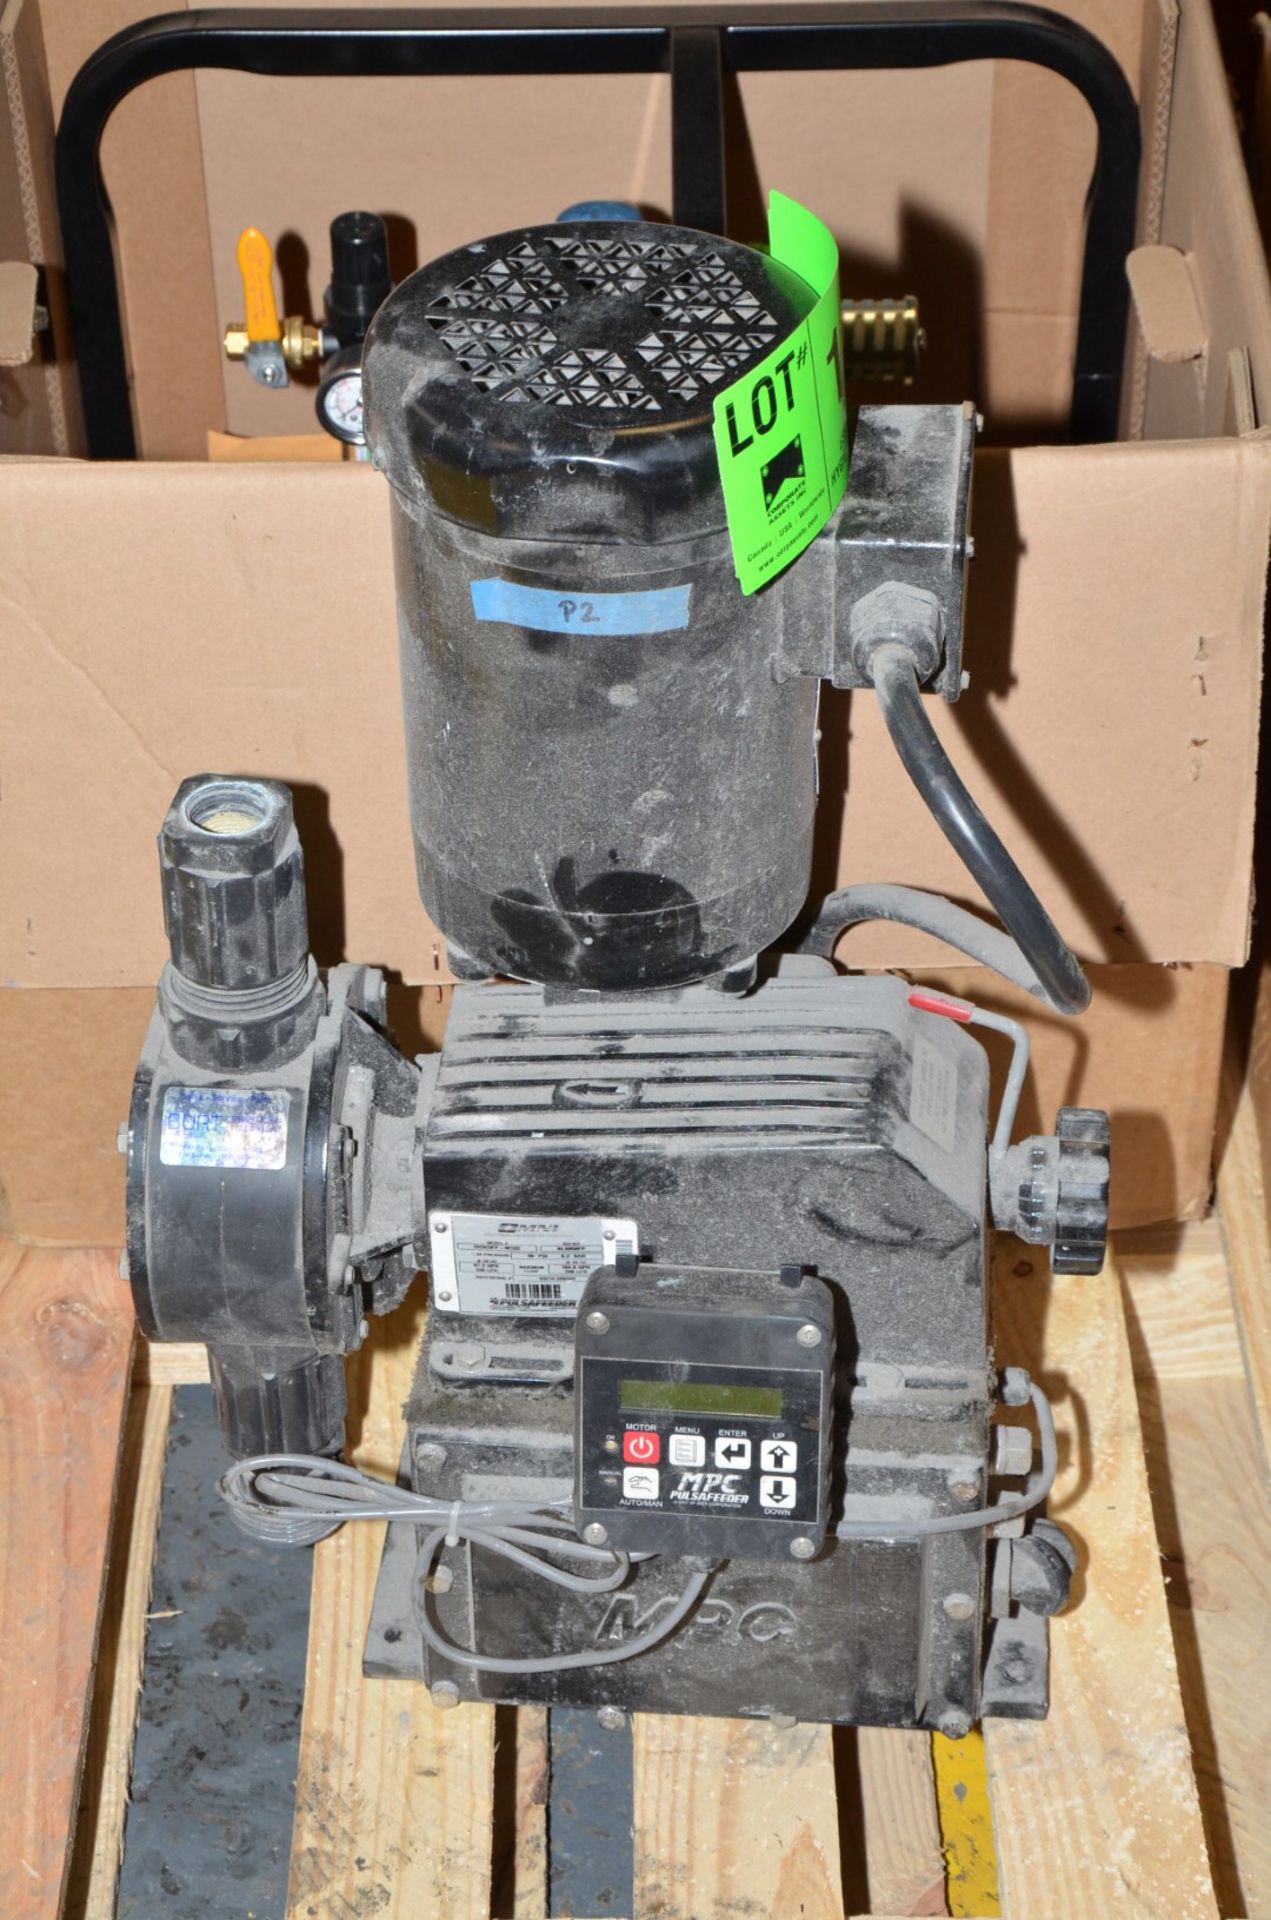 MNI DC5C5FP-M1XE VARIABLE SPEED DIGITAL METERING PUMP WITH DIGITAL MPC PULSAFEEDER CONTROL, 90 - Image 2 of 4